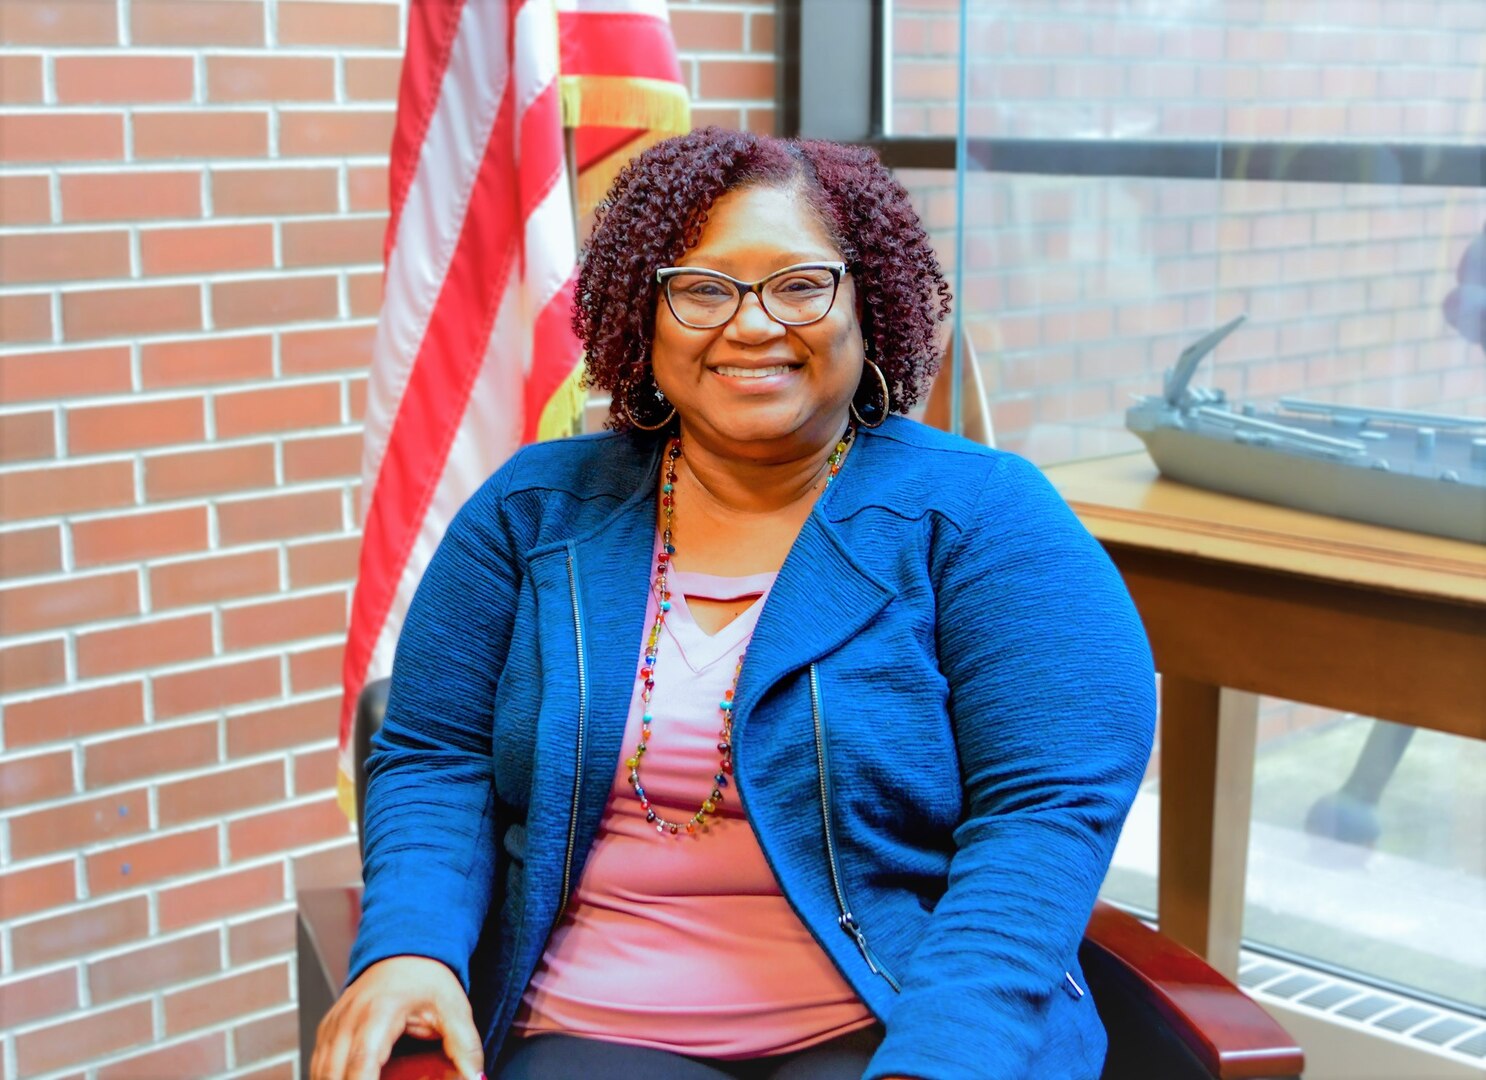 IMAGE: Naval Surface Warfare Center Dahlgren Division spotlights Tia Ward, a business operations manager for the Integrated Engagement Systems Department. Ward is being highlighted for her leadership skills and her impressive efforts to support the Navy warfighter.